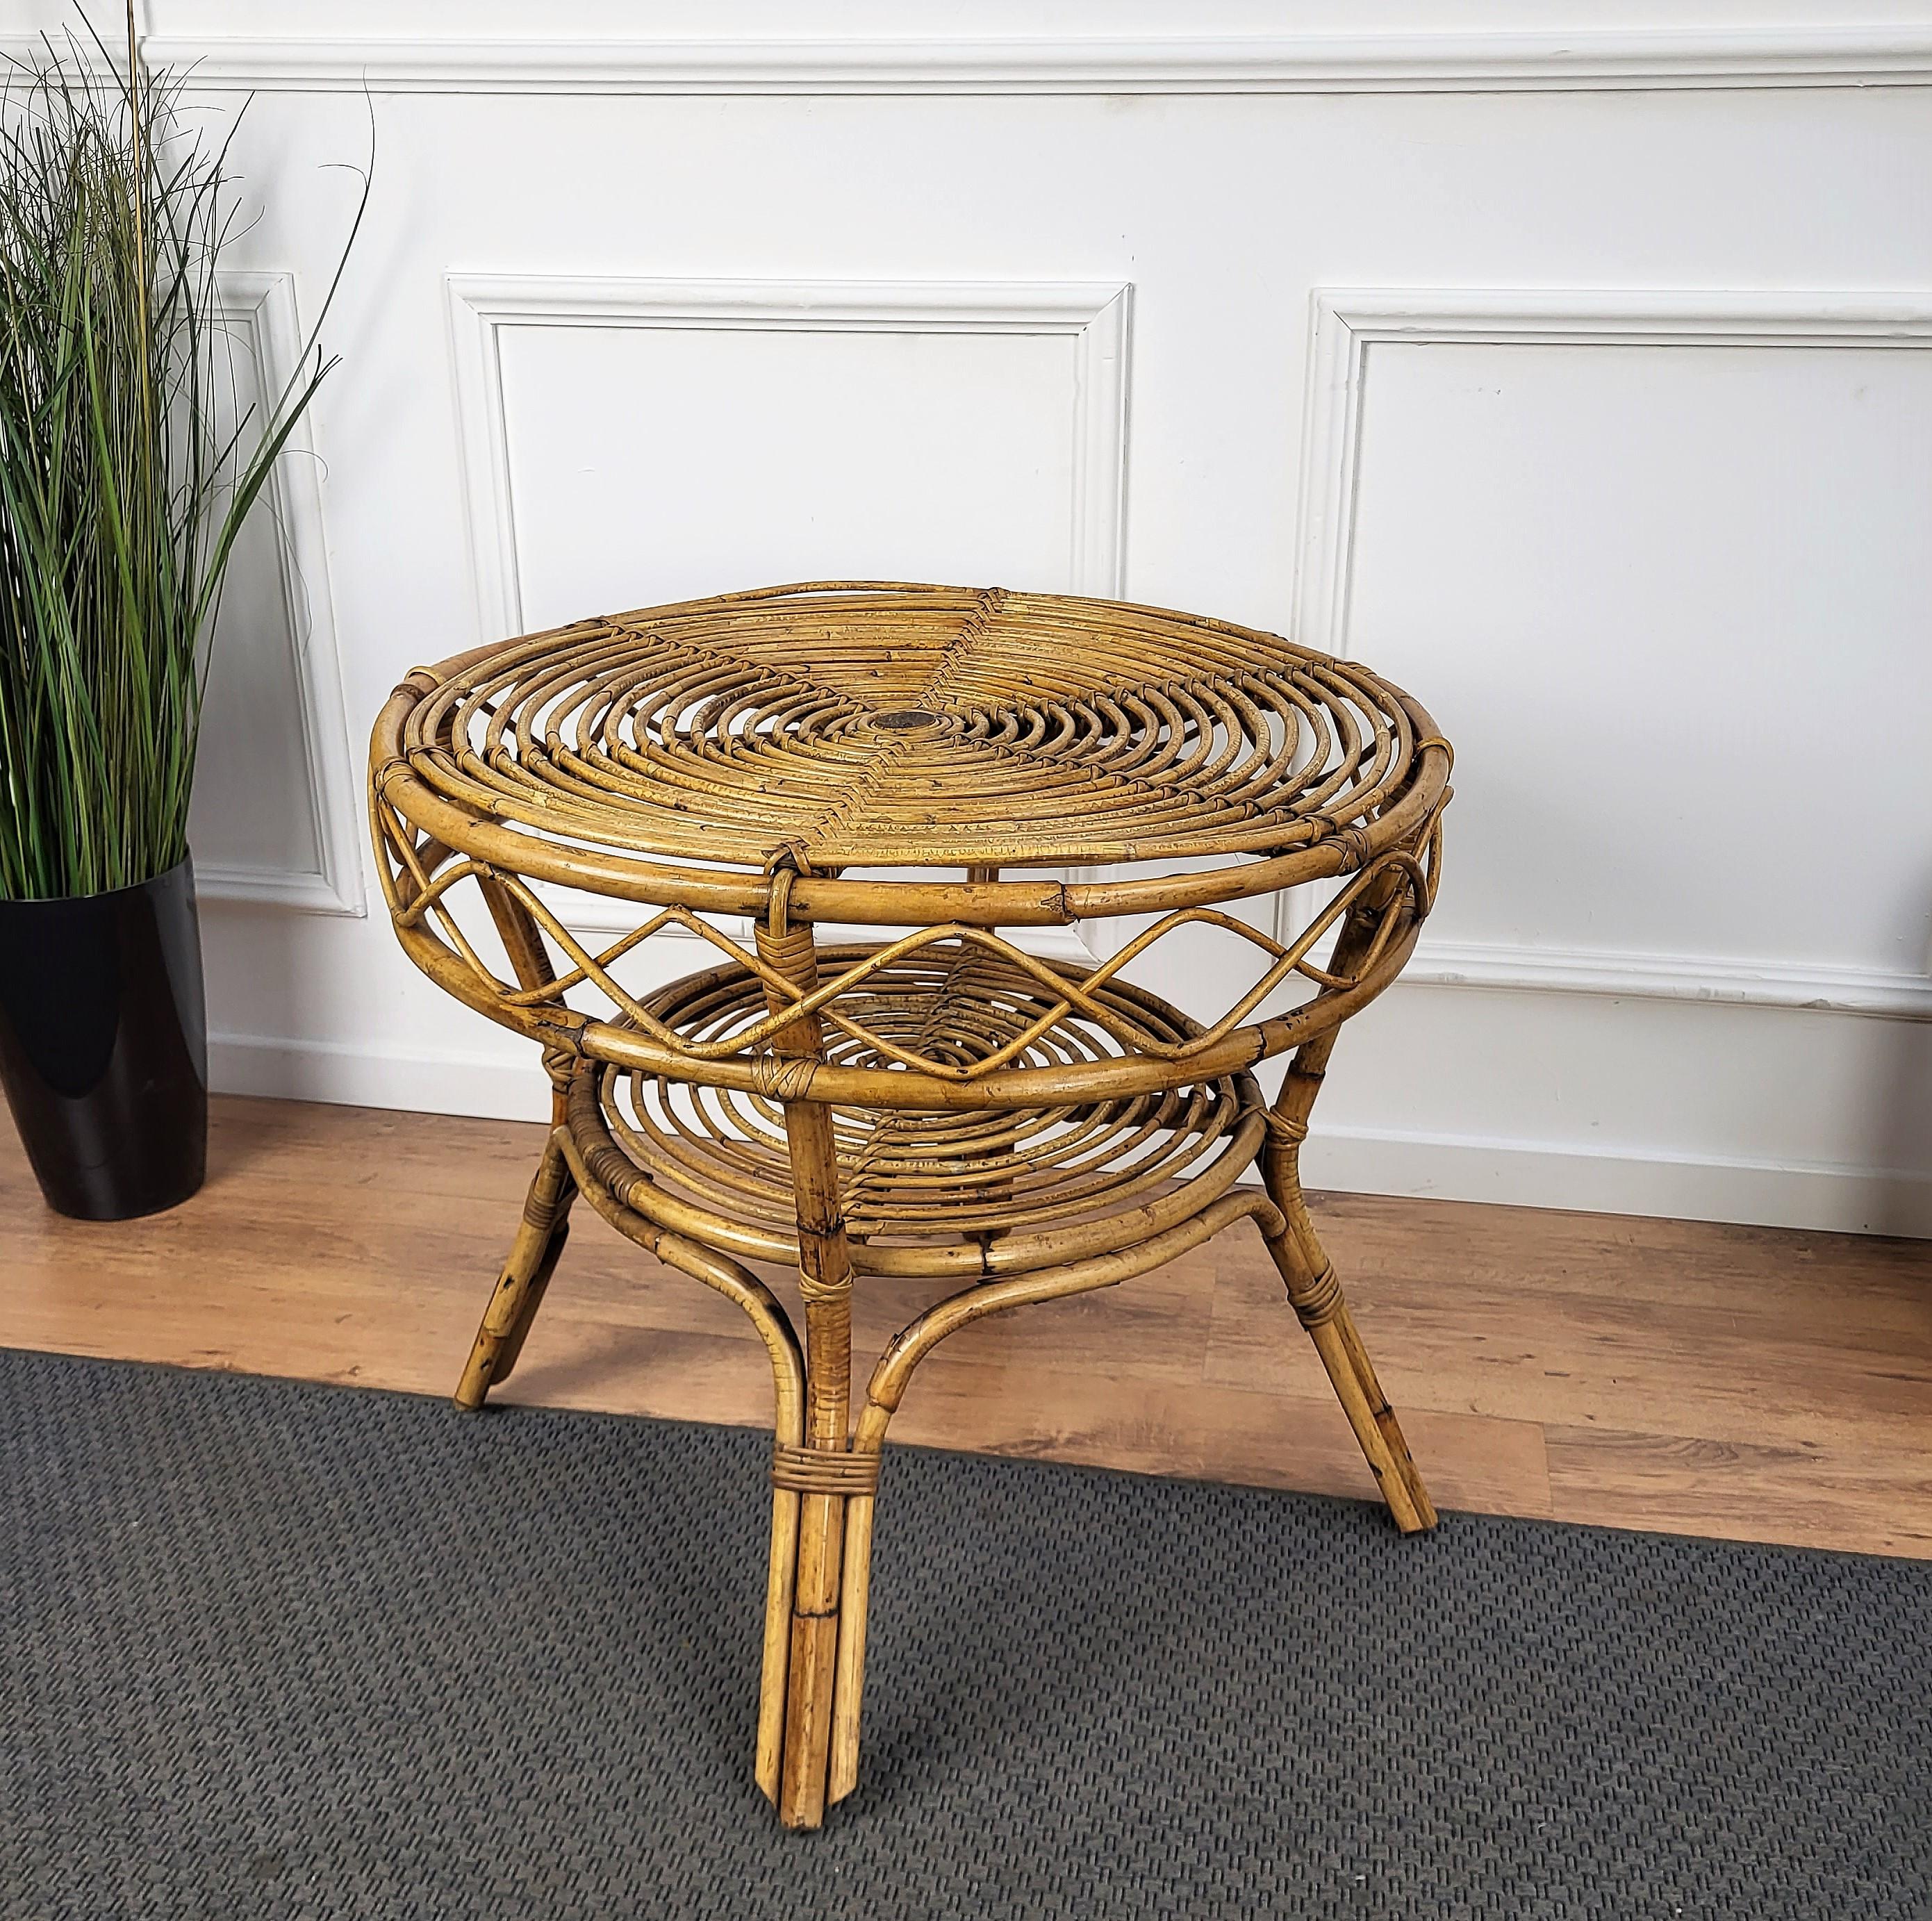 20th Century 1960s Italian Bamboo Rattan Bohemian French Riviera Round Coffee Table For Sale